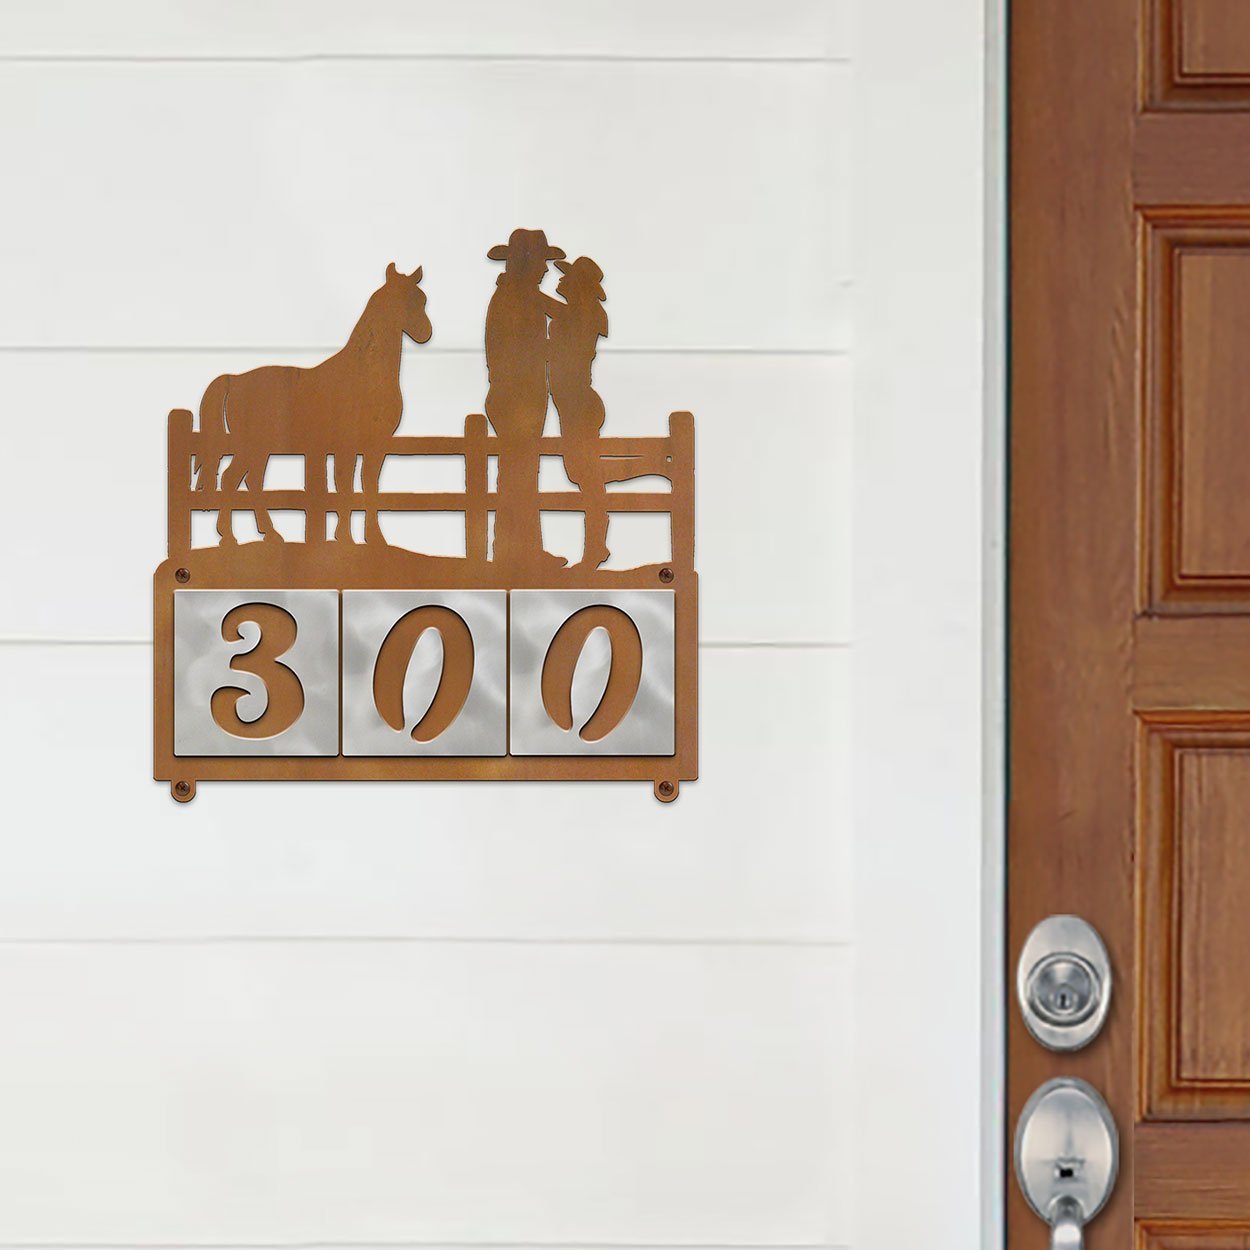 609113 - XL Cowboy Couple with Horse Design 3-Digit Horizontal 6in Tile Outdoor House Numbers